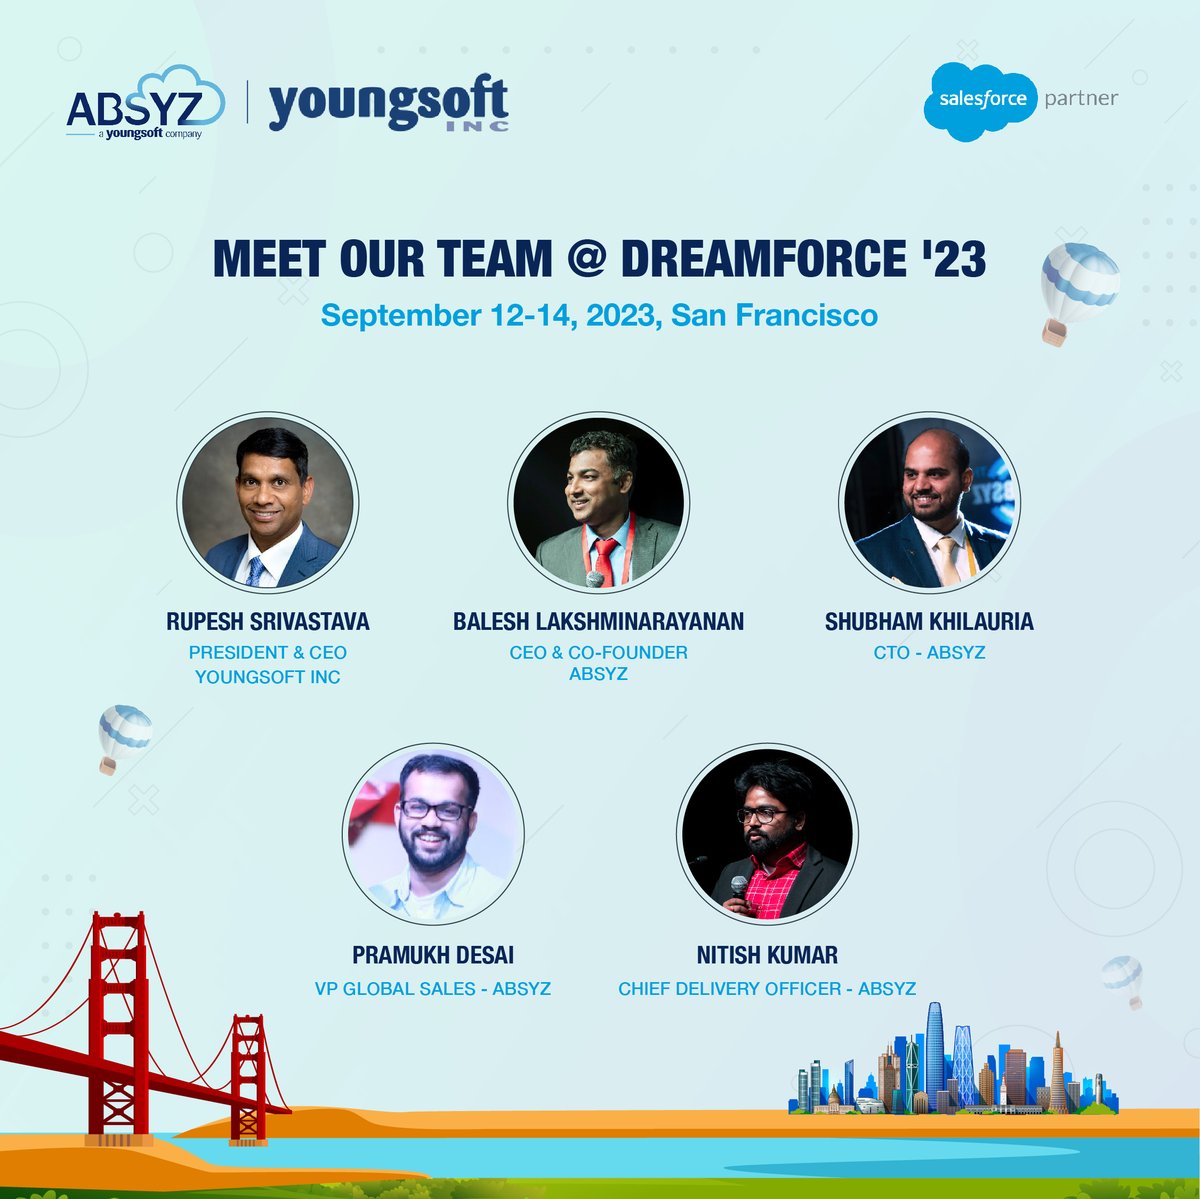 The countdown is on, and we can't contain our excitement!
Our team is excited to meet you all at @Salesforce #Dreamforce 2023. It's the ideal opportunity to connect, expand your network, & explore exciting possibilities. #SalesforceAI  #Dreamforce2023 #lifeatabsyz #DF23📷 #AICRM